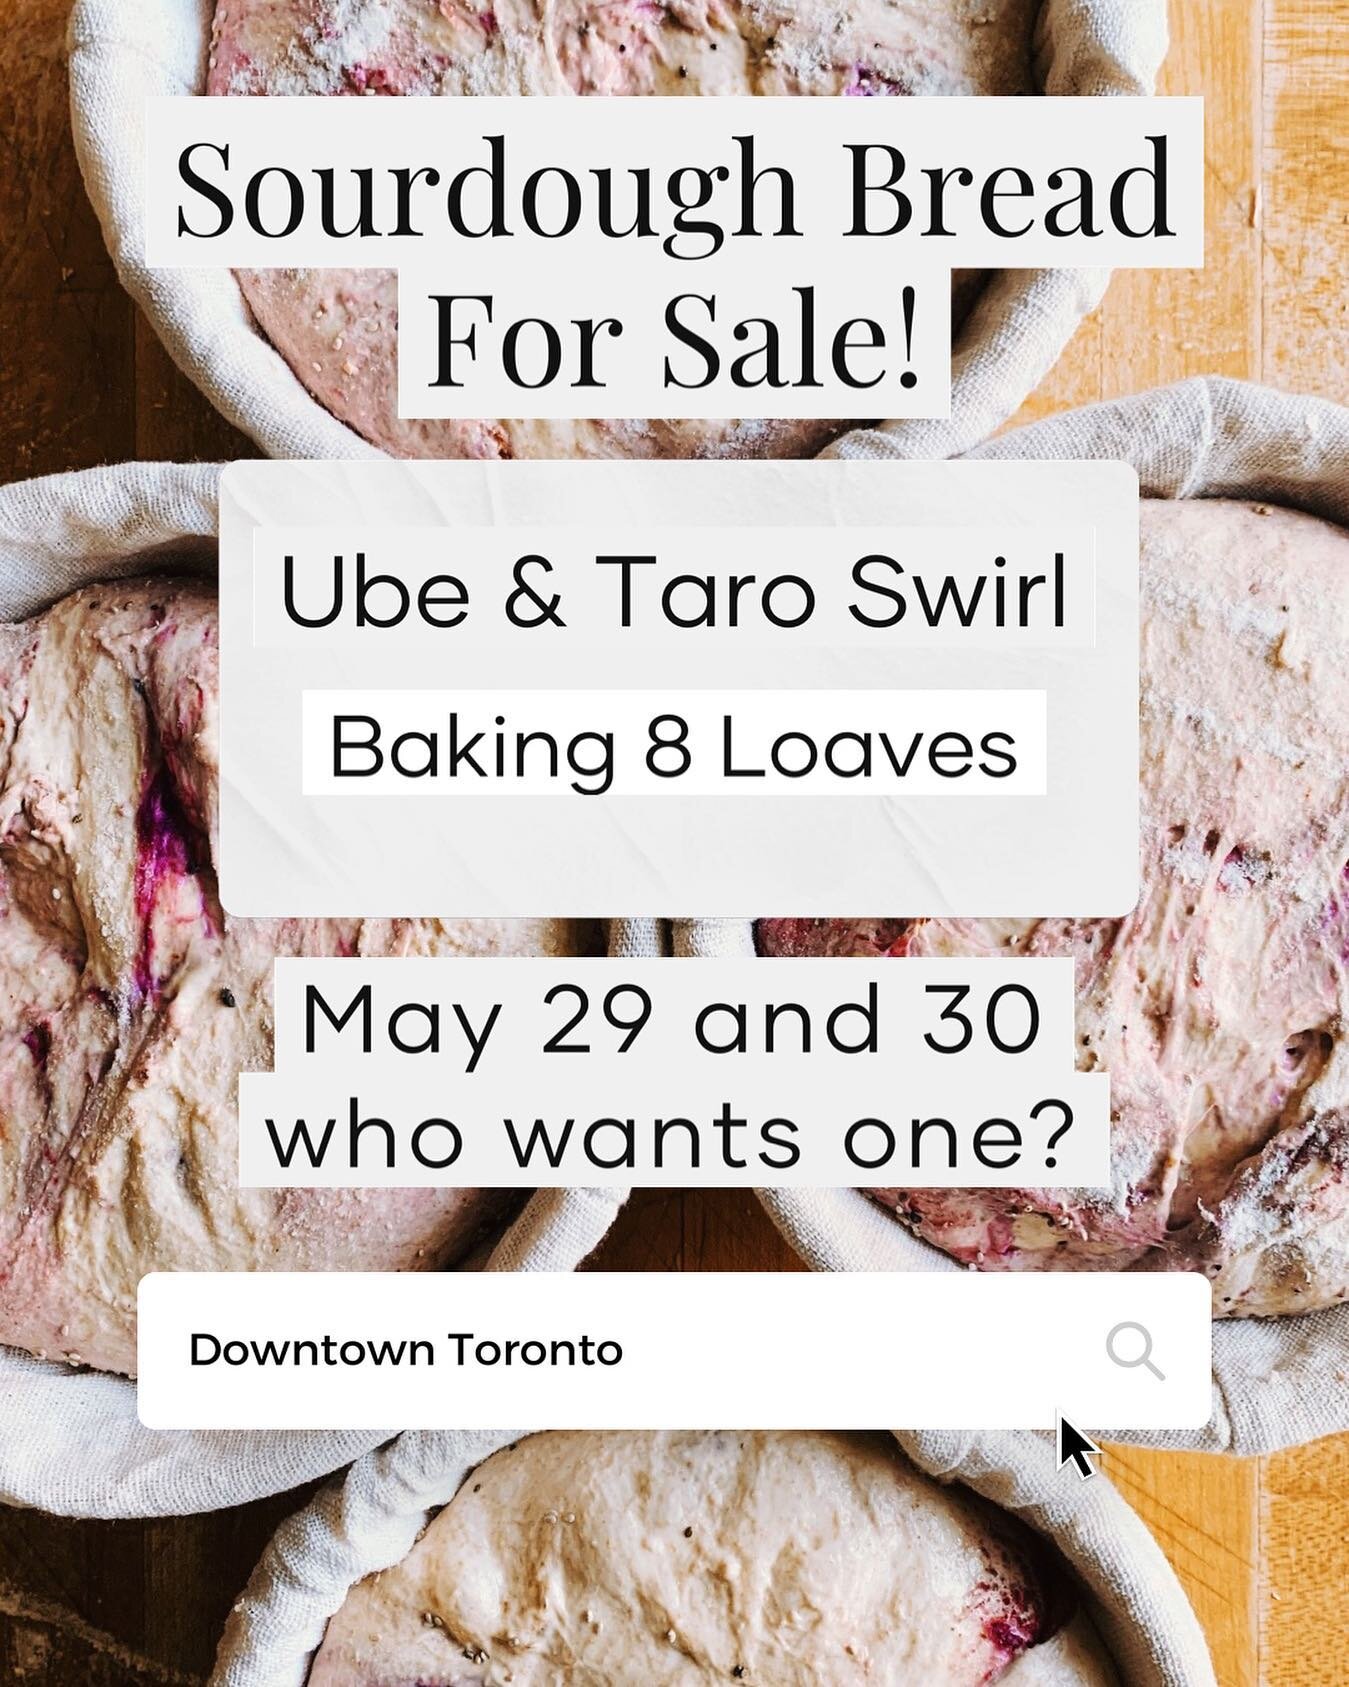 2 SOLD! 6 Still Available!! It&rsquo;s that time of the week! Time to sell Bread!

Type: Ube and Taro Swirl with some Korean 
  Chili, Nigella Seeds inside and Chia Seeds
  on Top
Cost: $18 dollars
Quantity: 6
When: May 29 and 30 (Saturday and Sunday